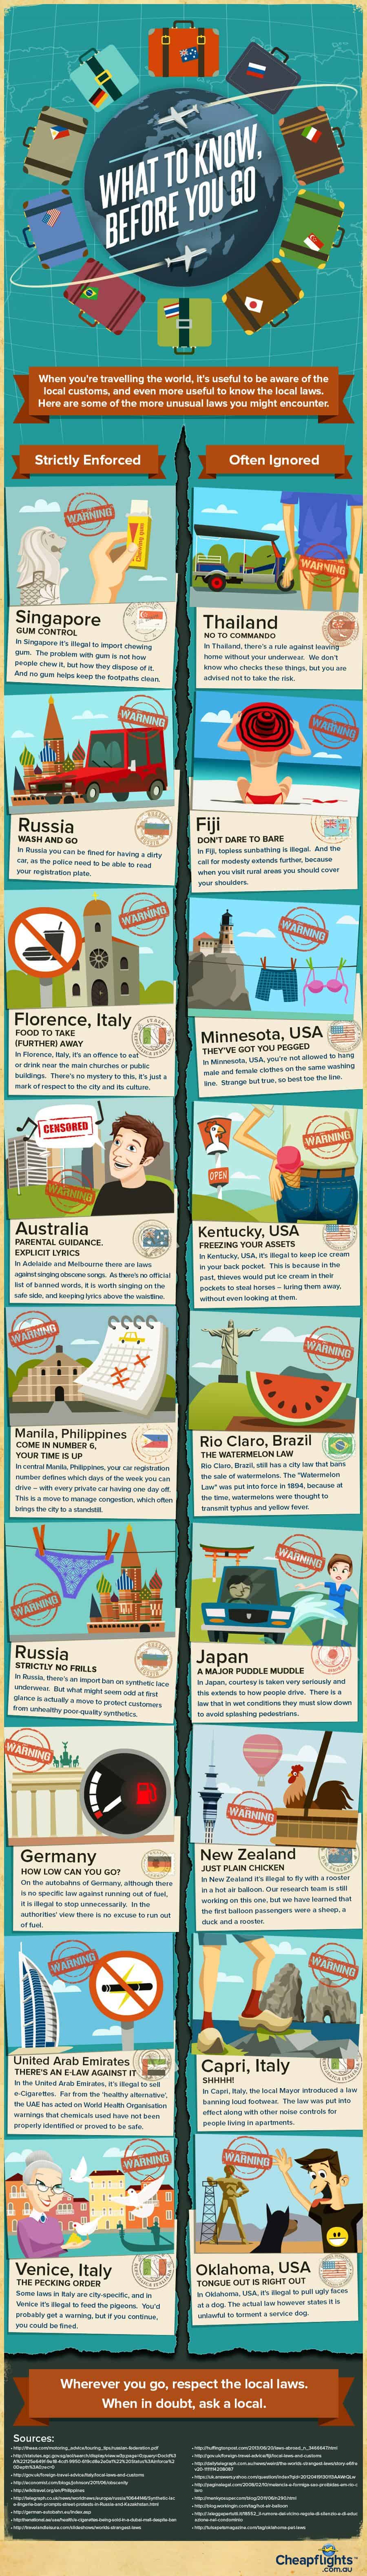 Laws to know before traveling to a foreign country